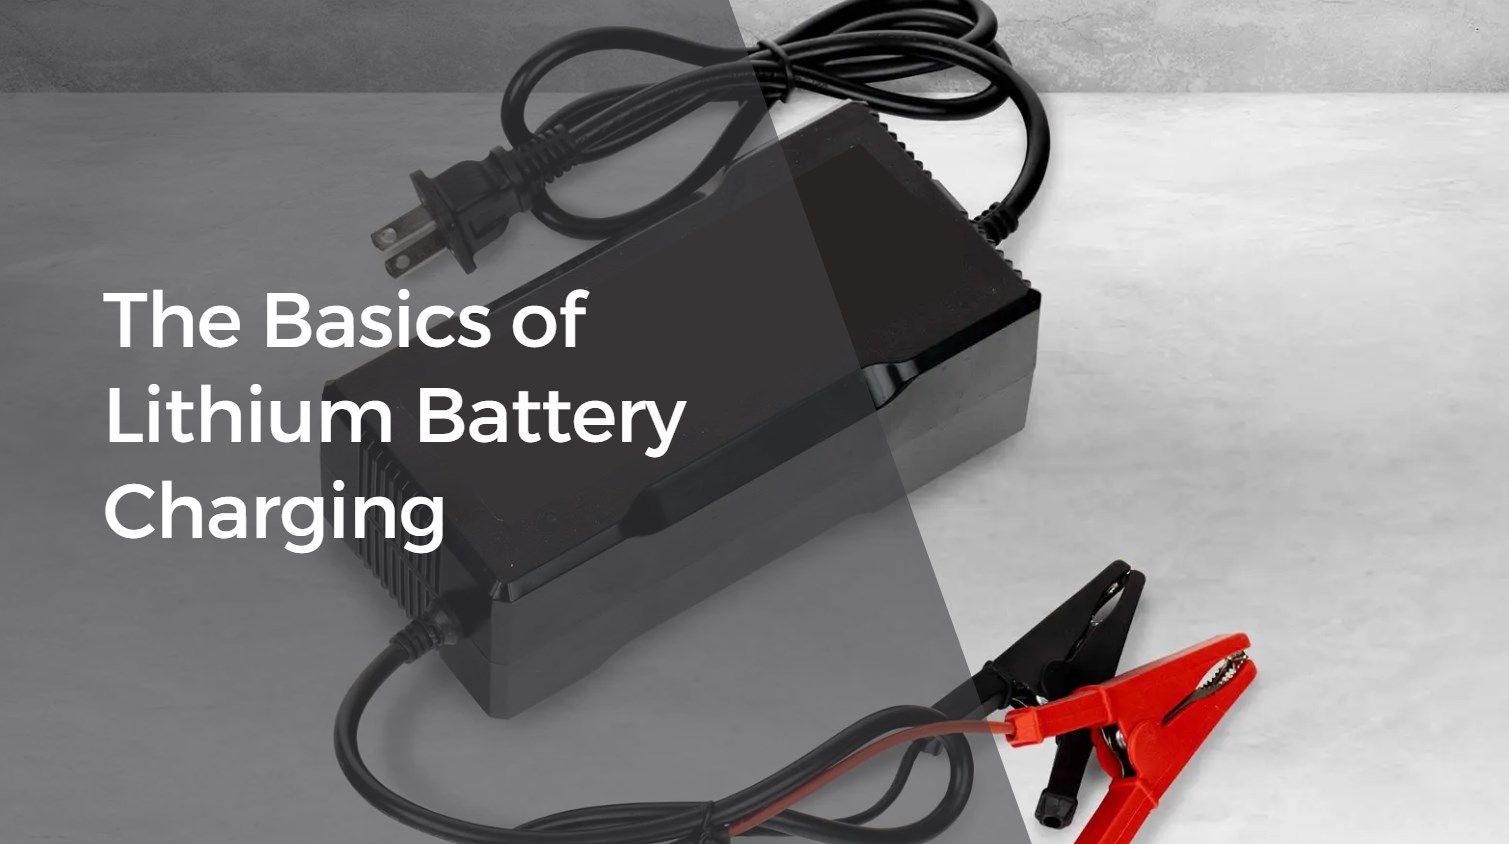 The Basics of Lithium Battery Charging. lfp battery charger